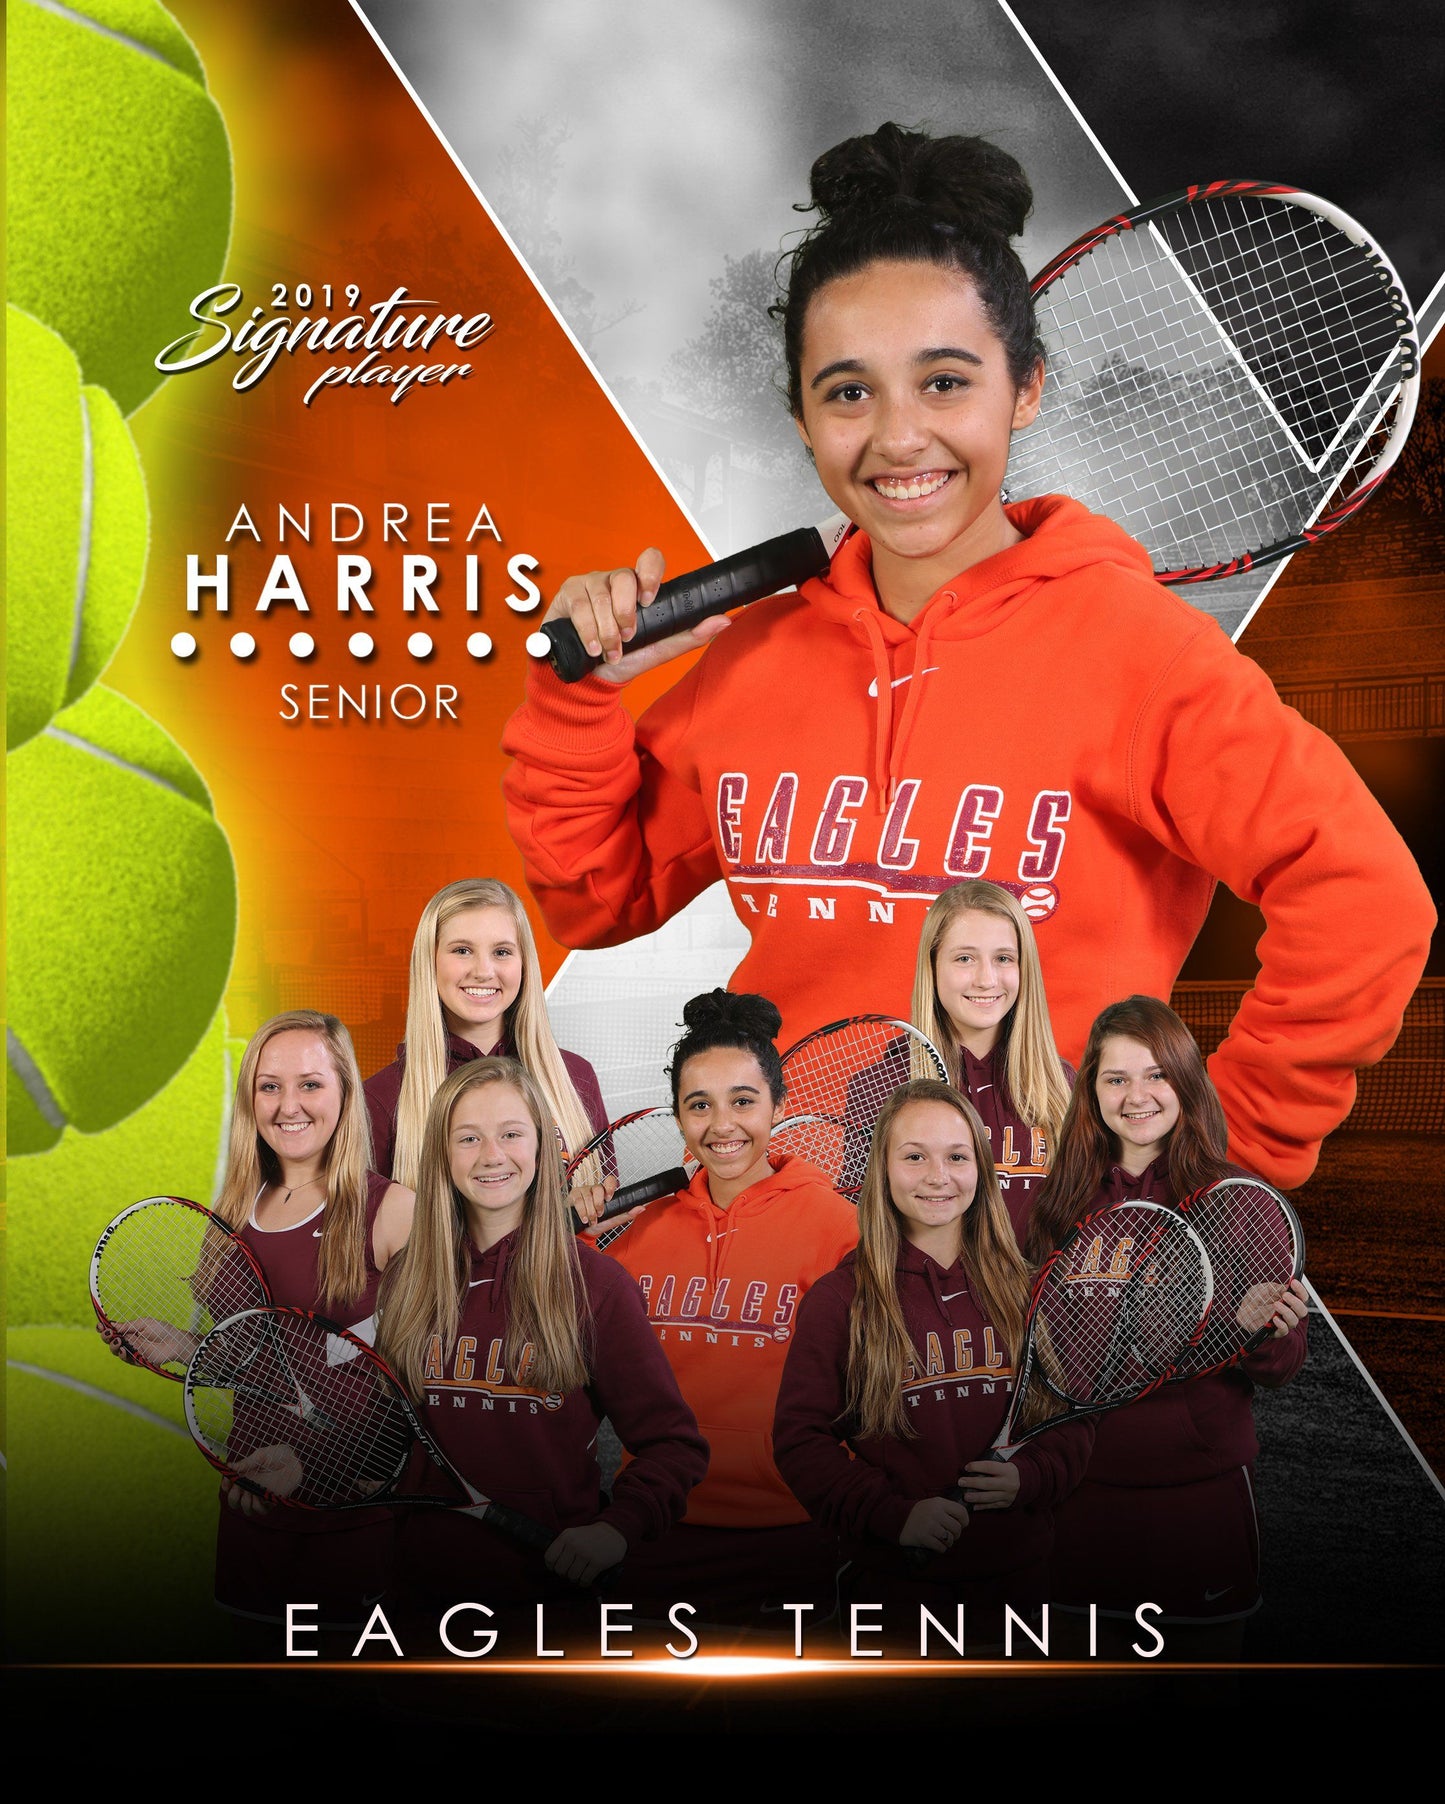 Signature Player - Tennis - V2 - Extraction Memory Mate V Template-Photoshop Template - Photo Solutions